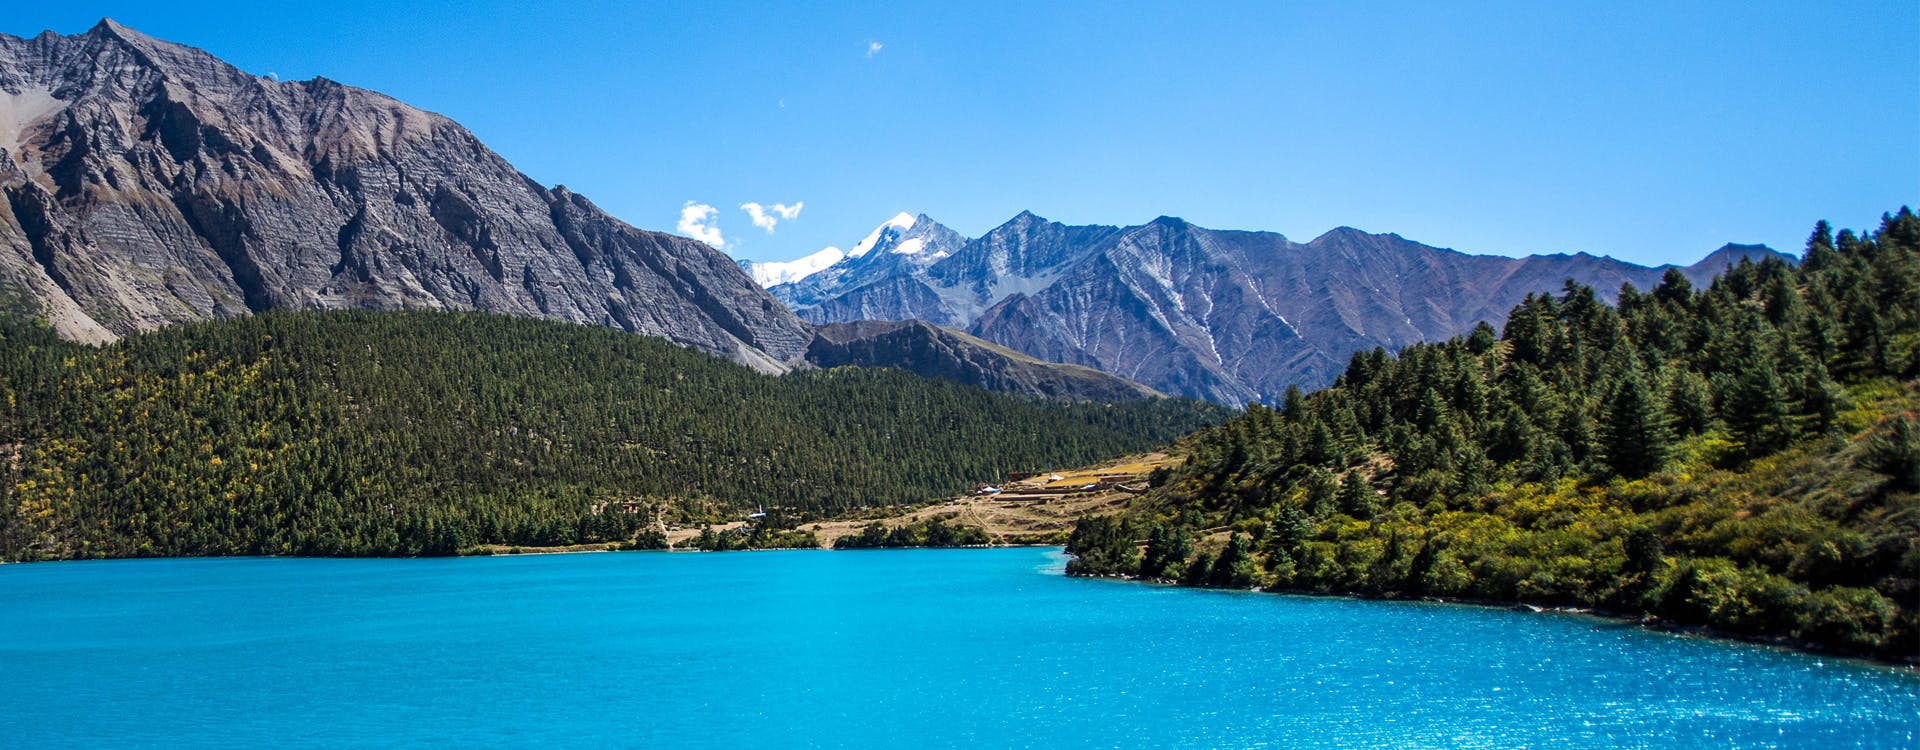 Experience the untouched landscapes and rich cultural heritage of Lower Dolpo Trek, an off-the-beaten-path adventure in Nepal's secluded Trans-Himalayan region.